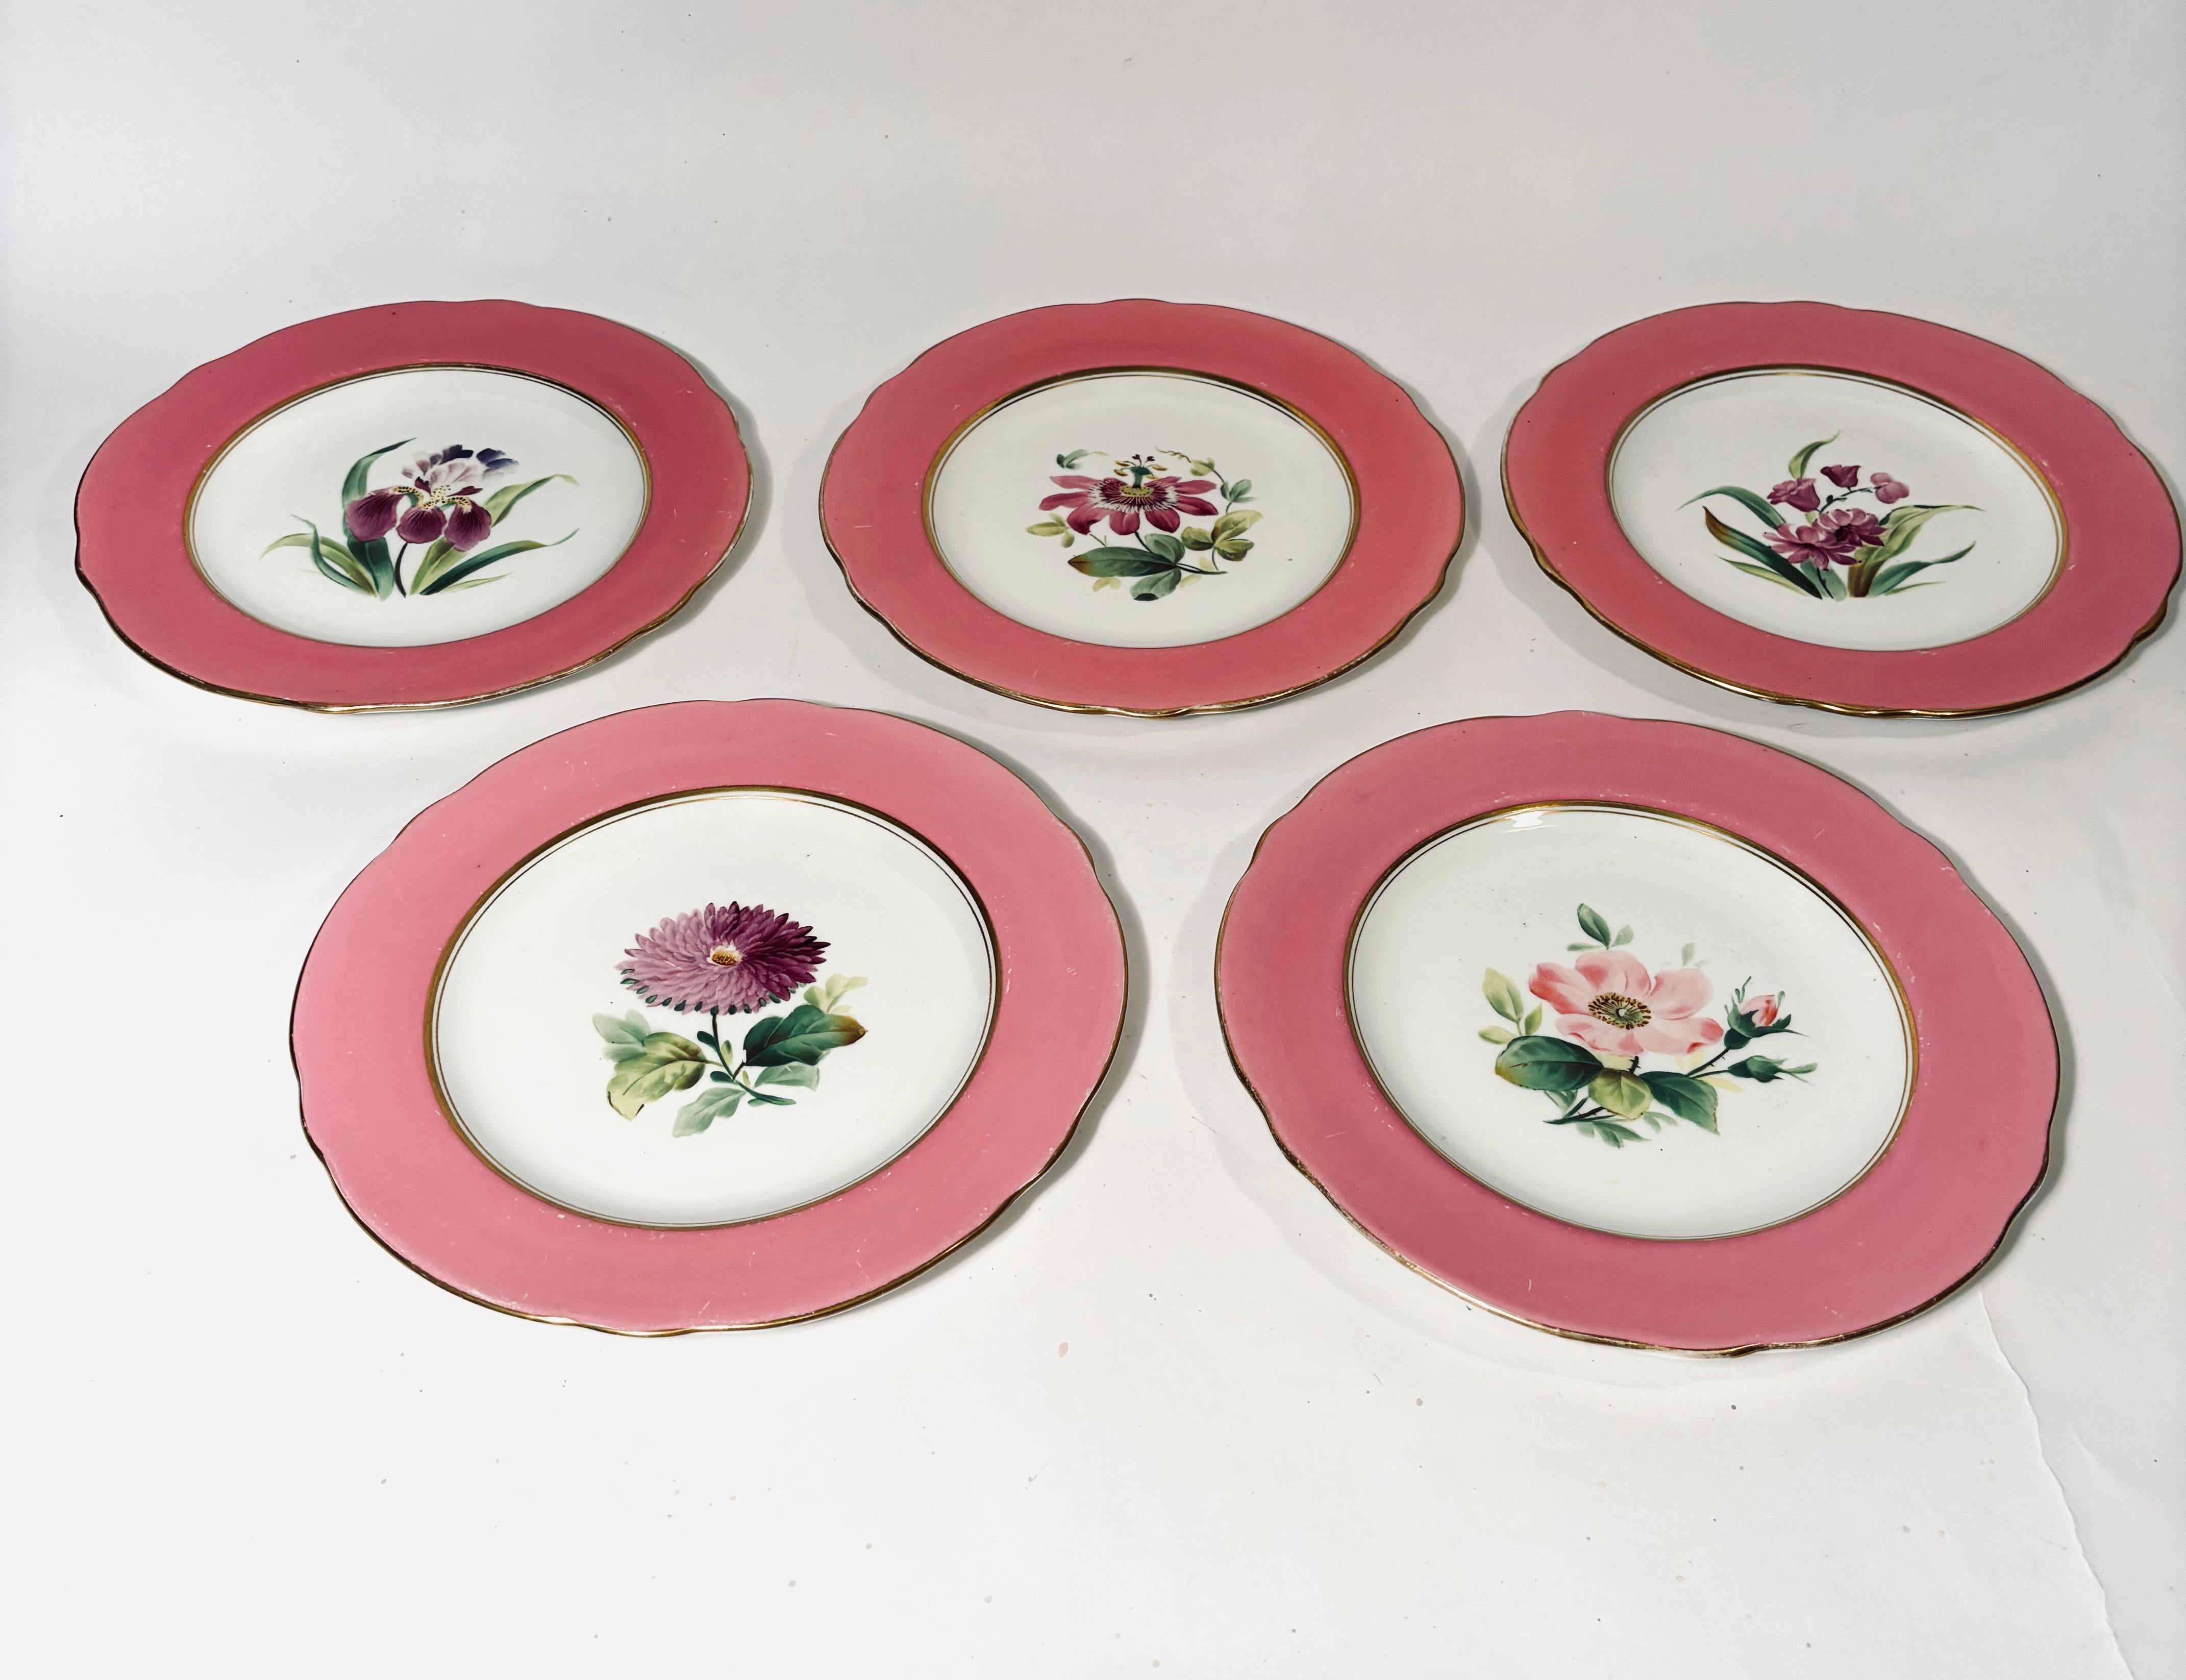 Hand-Crafted 12 Pink Assorted Floral Dessert Plates 19th Century English, Trimmed in Gold